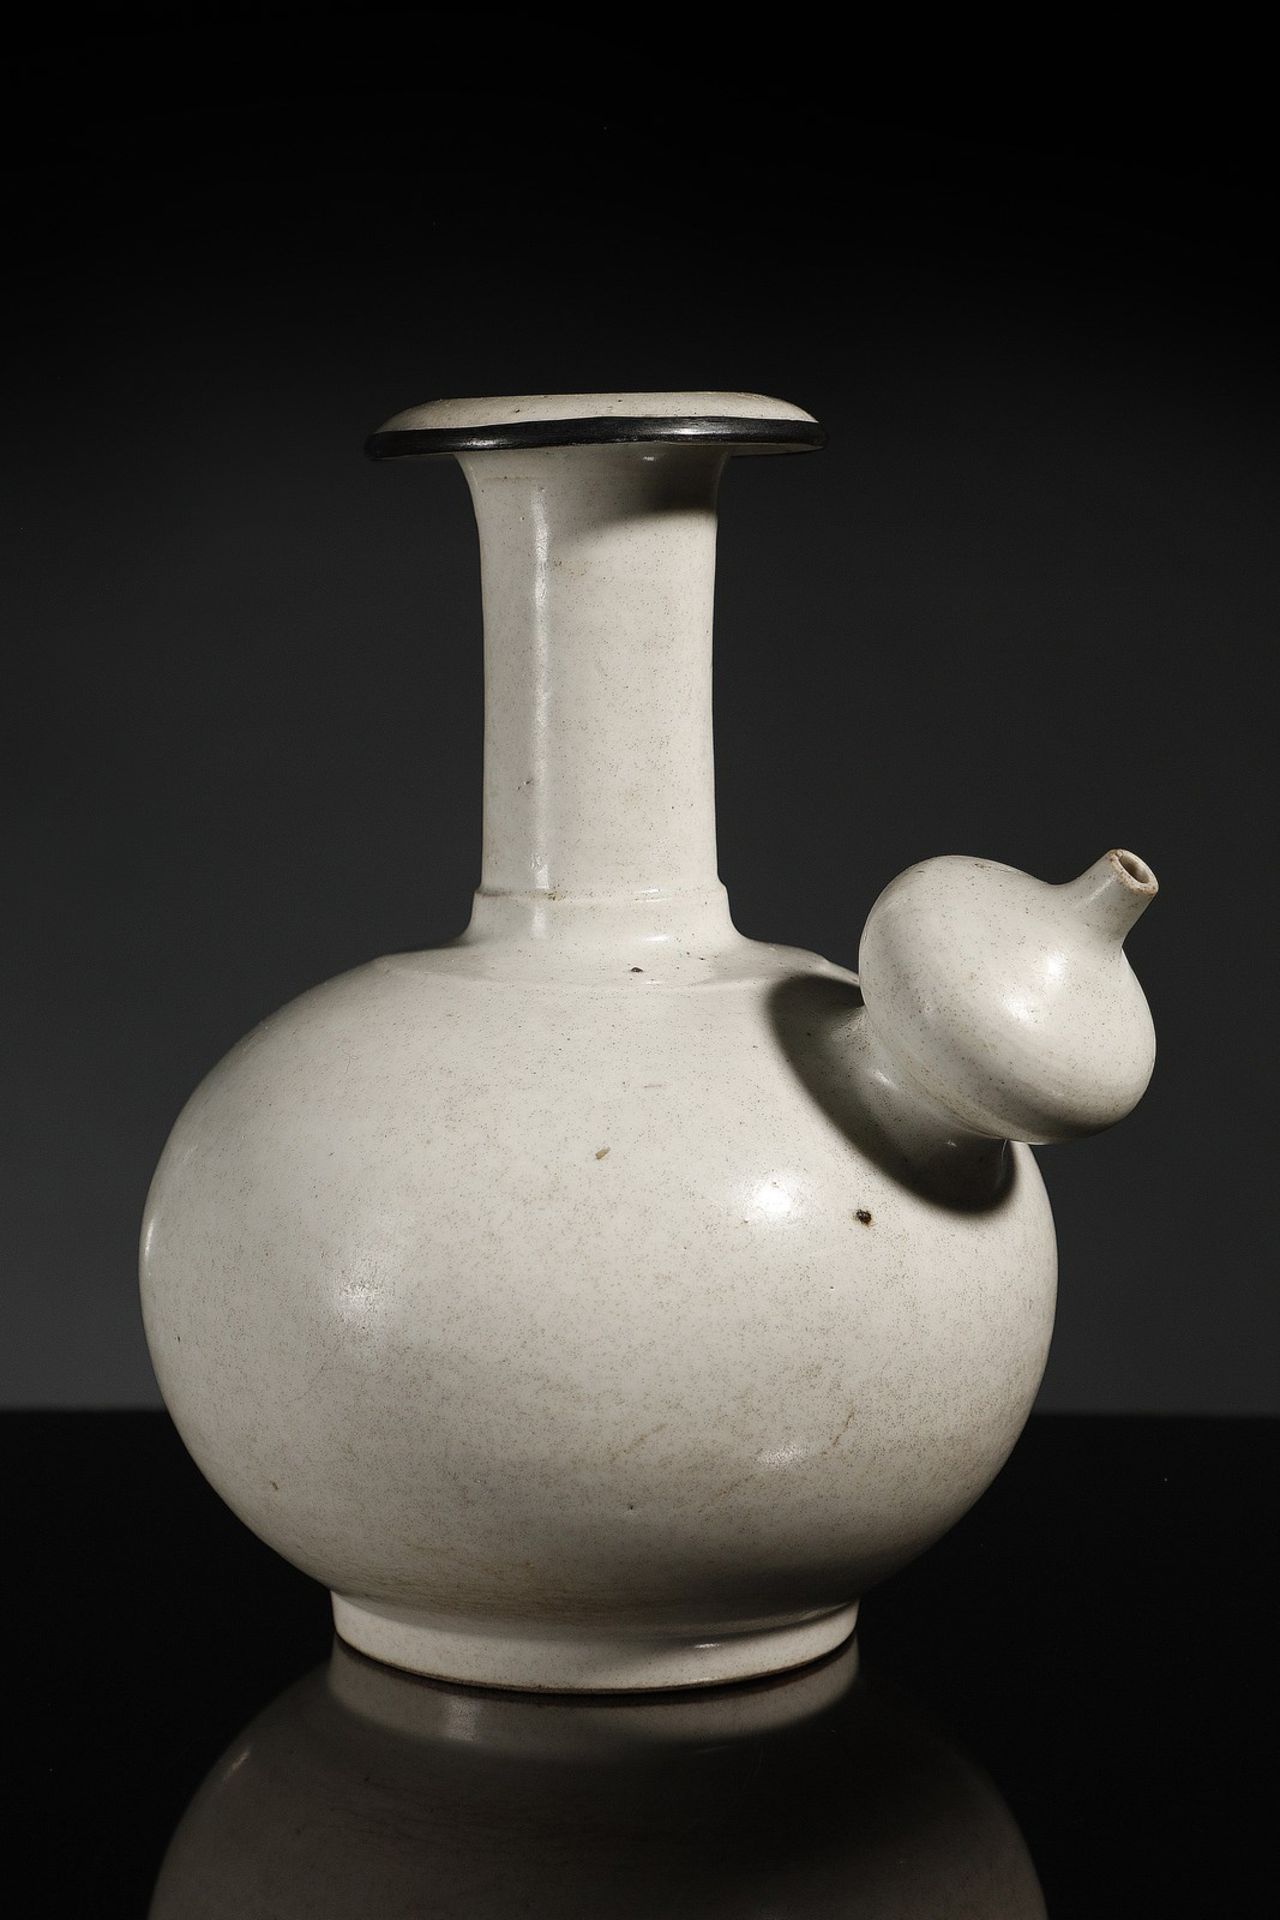 Arte Cinese  A monochrome Kendi China, possibly Song dynasty (960-1279), 13th century .